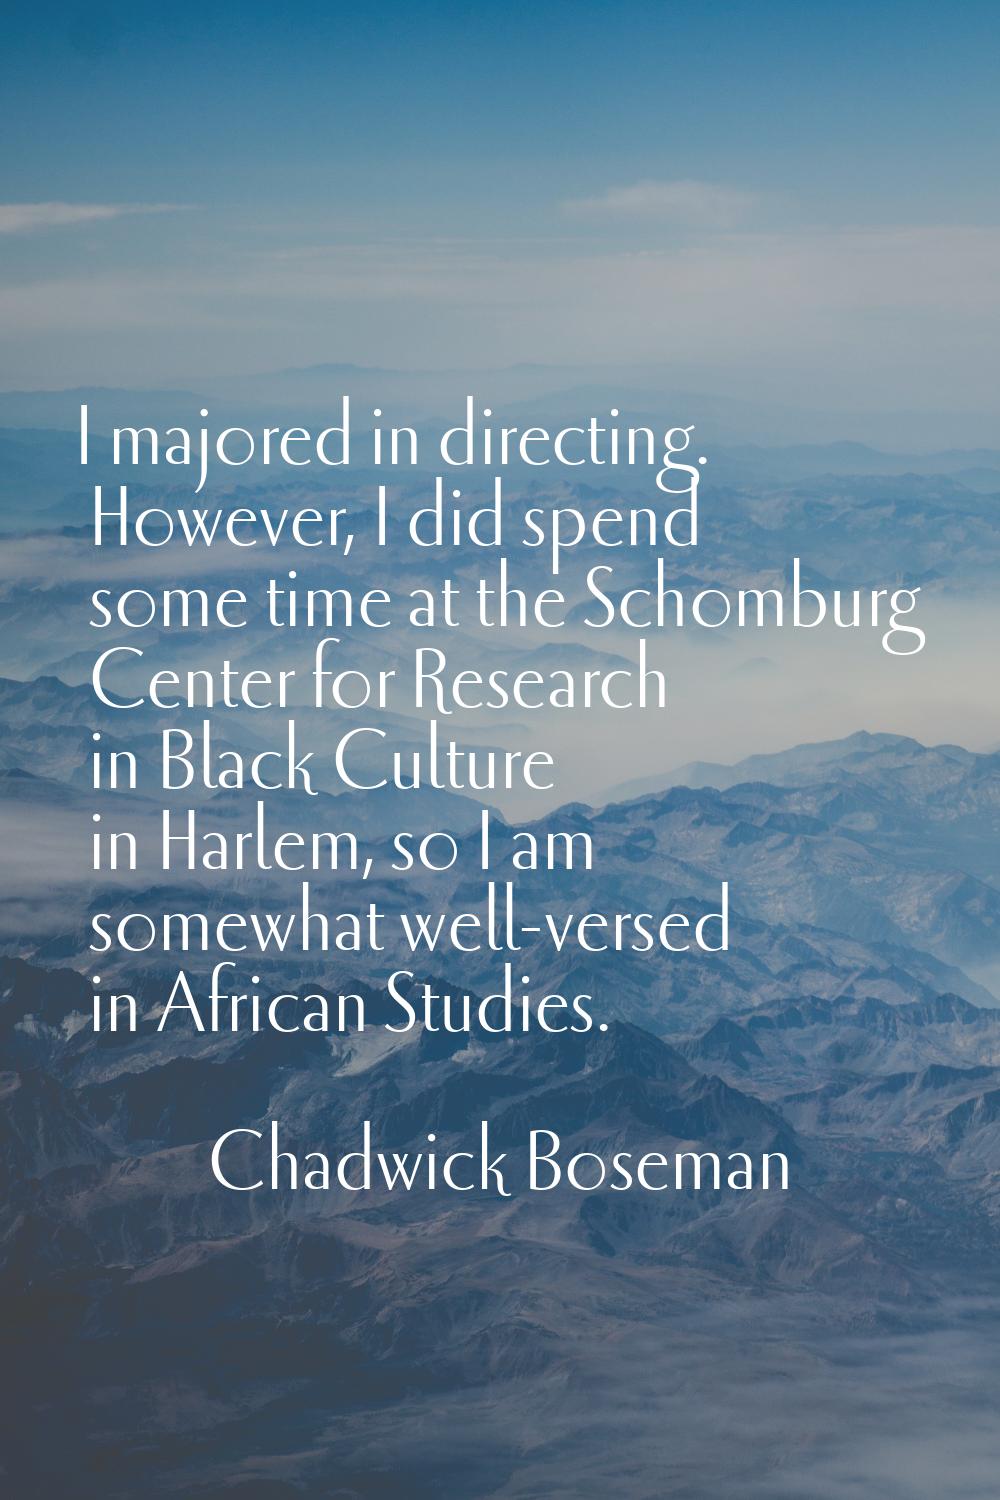 I majored in directing. However, I did spend some time at the Schomburg Center for Research in Blac